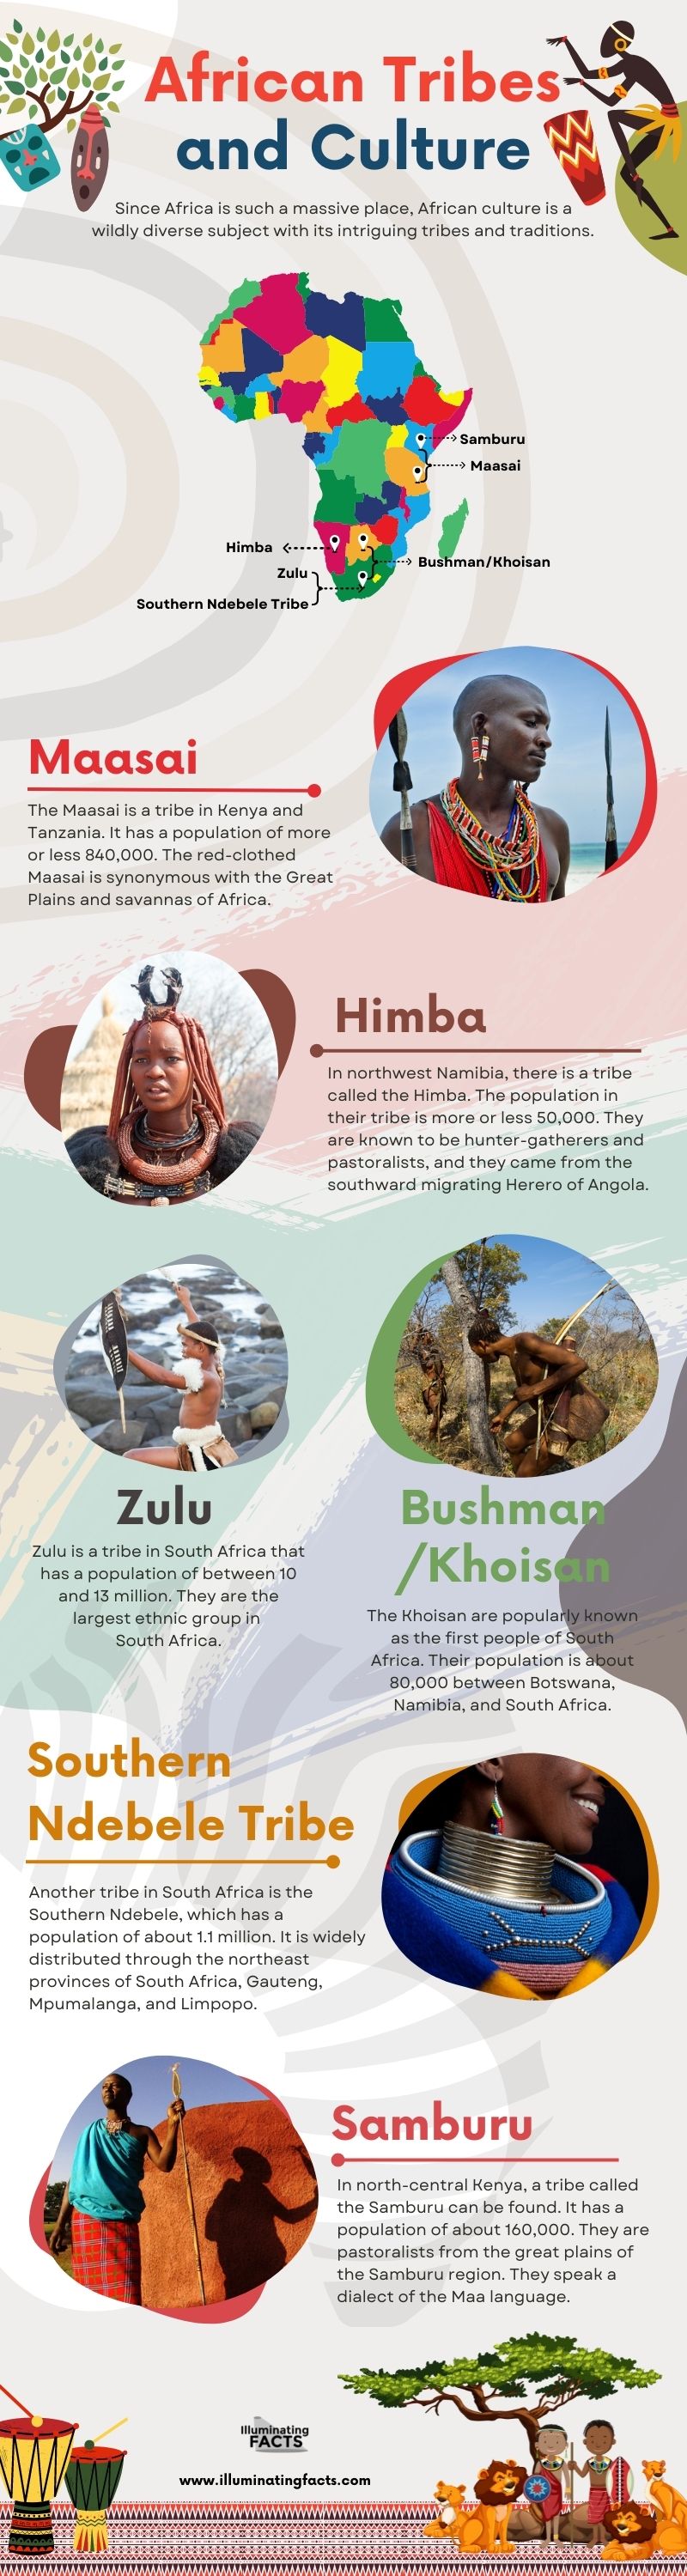 African Tribes and Culture